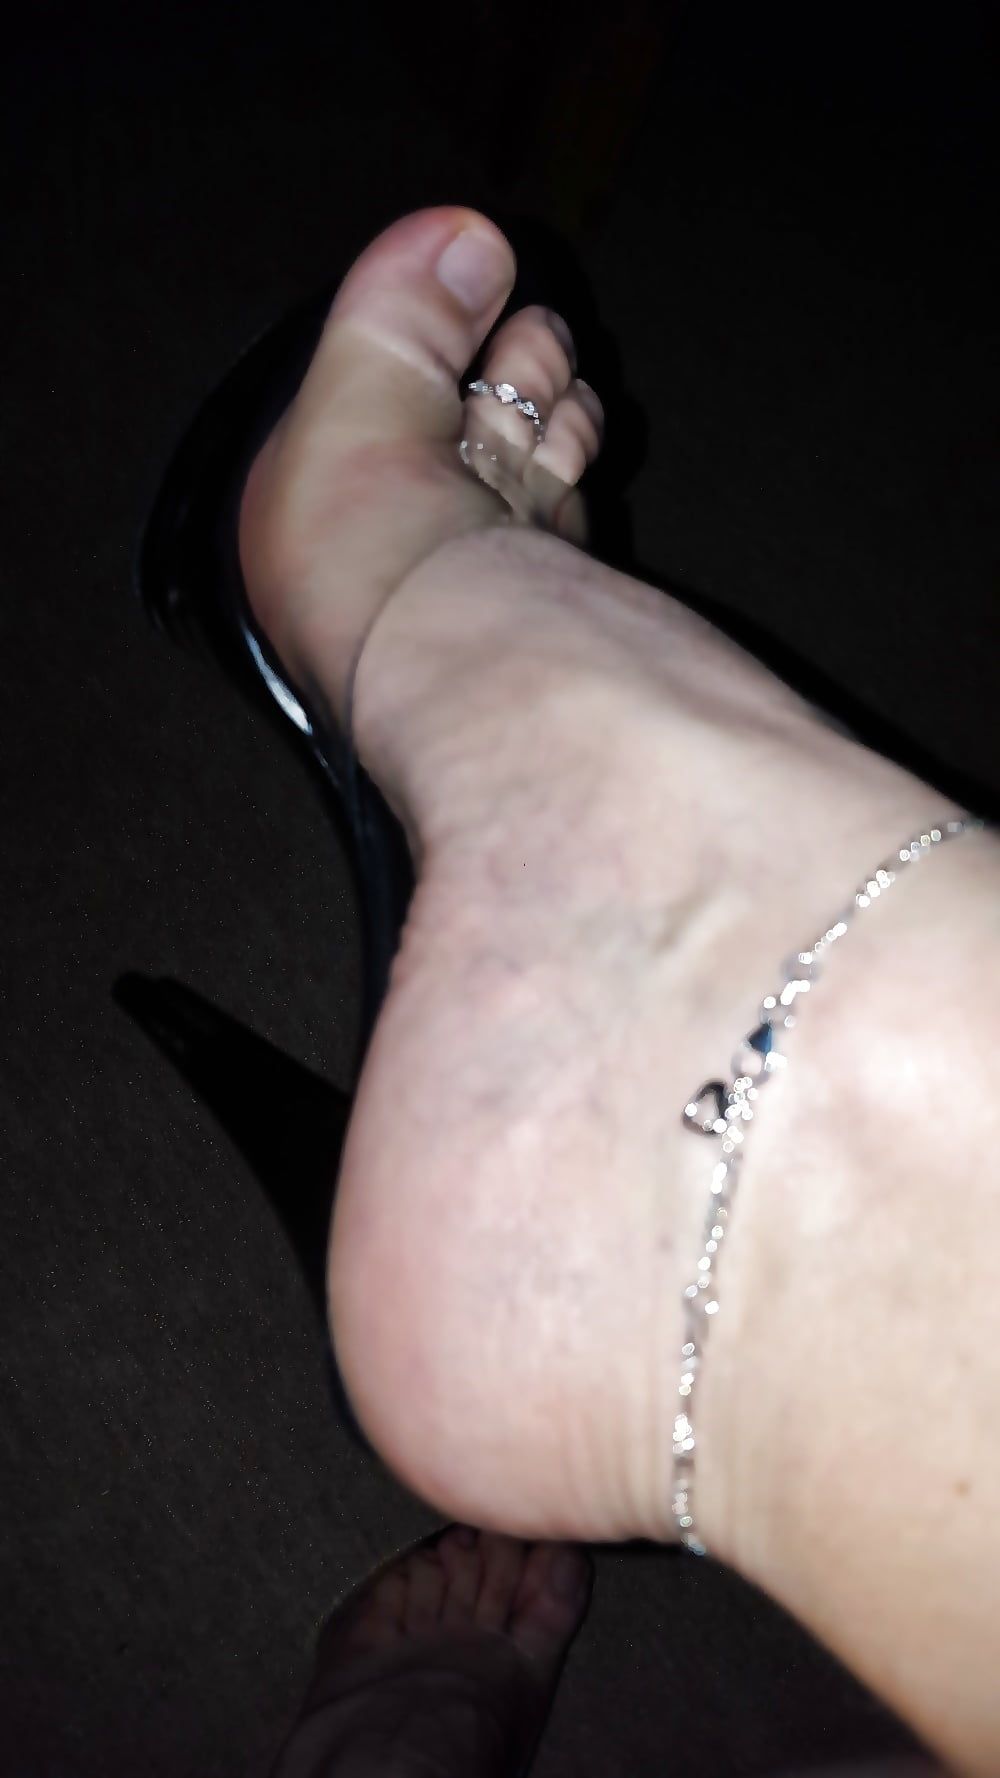 Pleaser Adore-701 ++ Feet ++ Anklets ++ Toe Ring #20